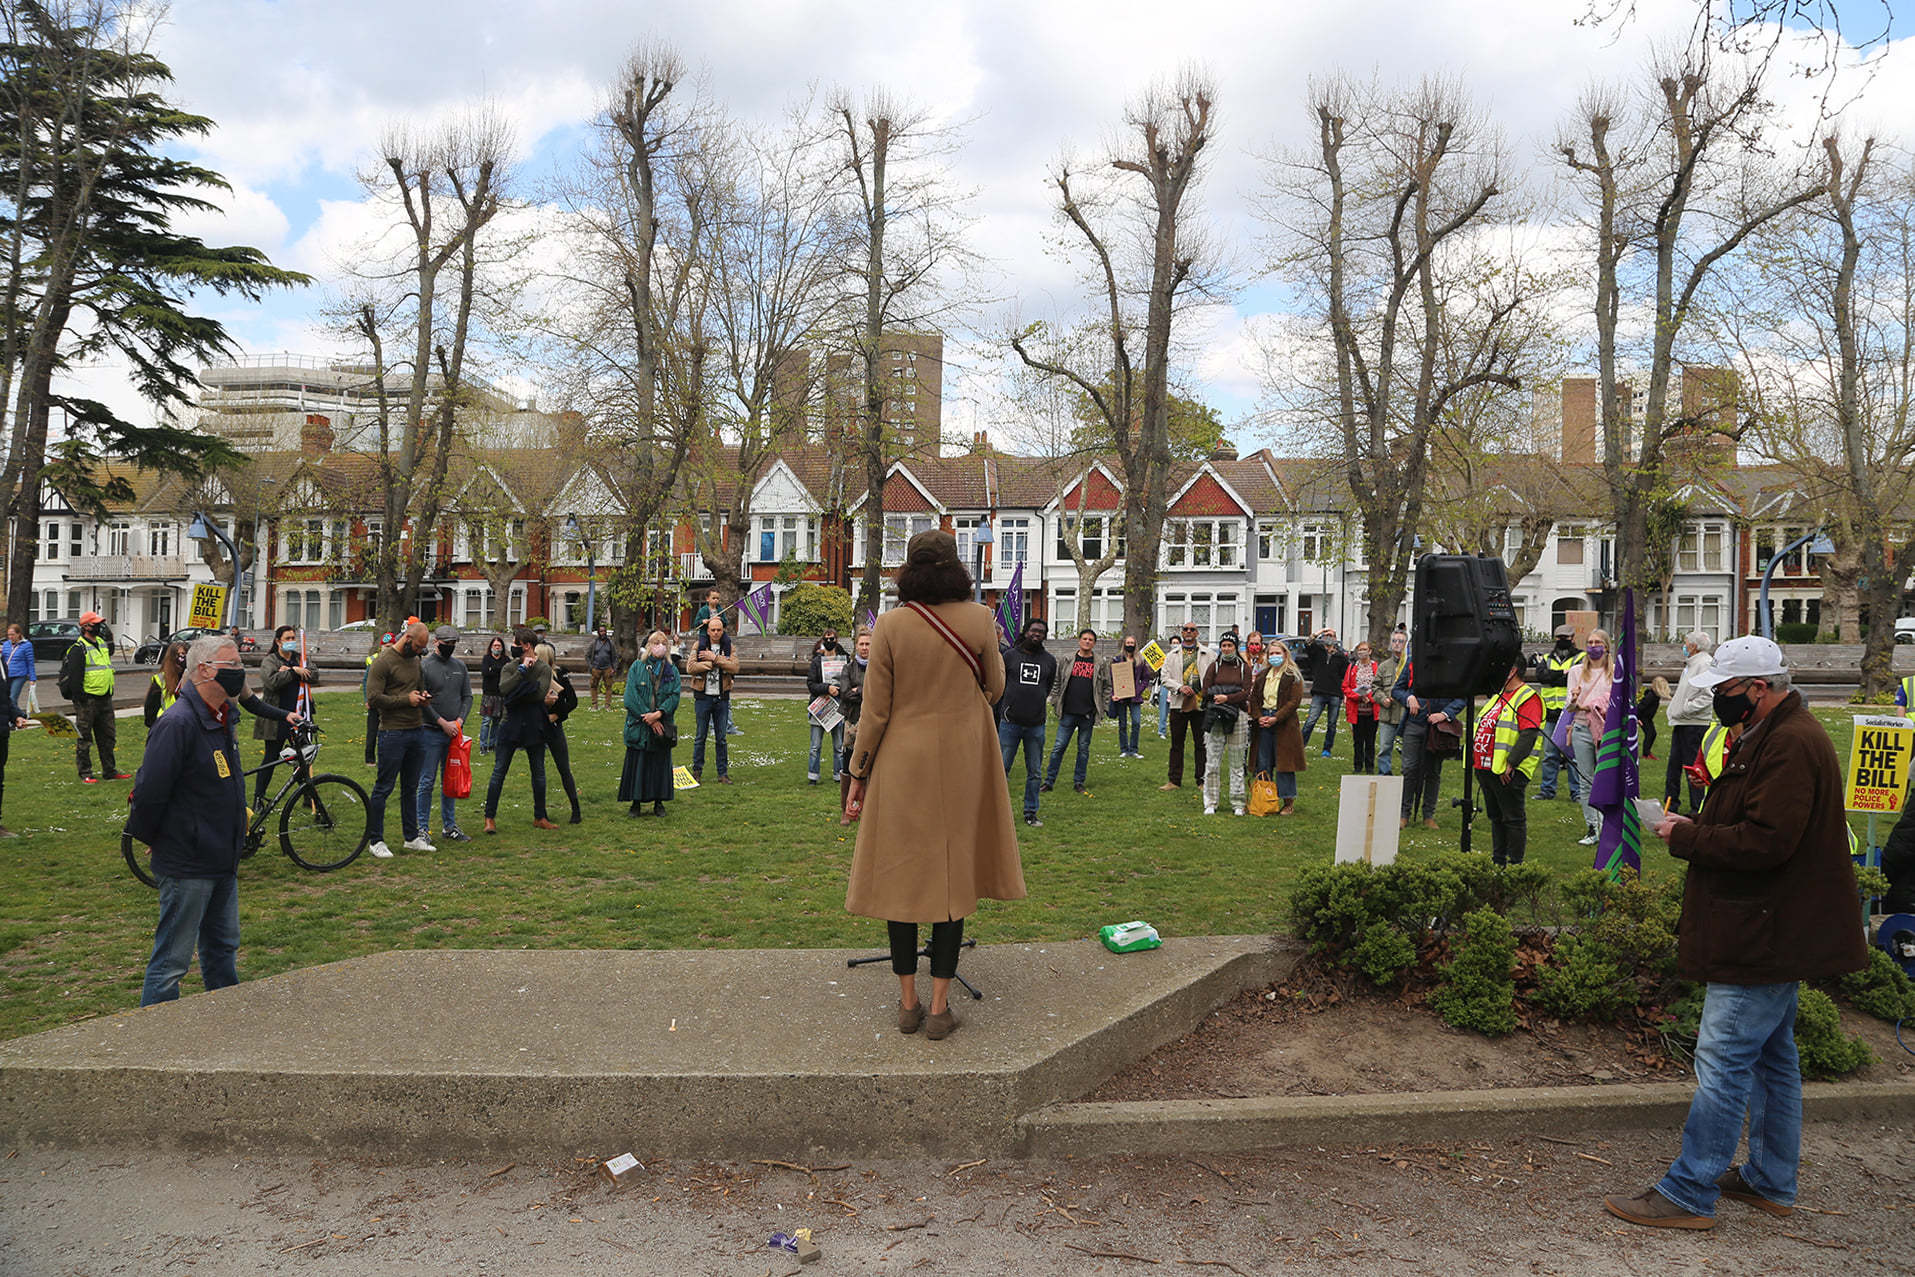 Rally - the protestors in Warrior Square, Southend